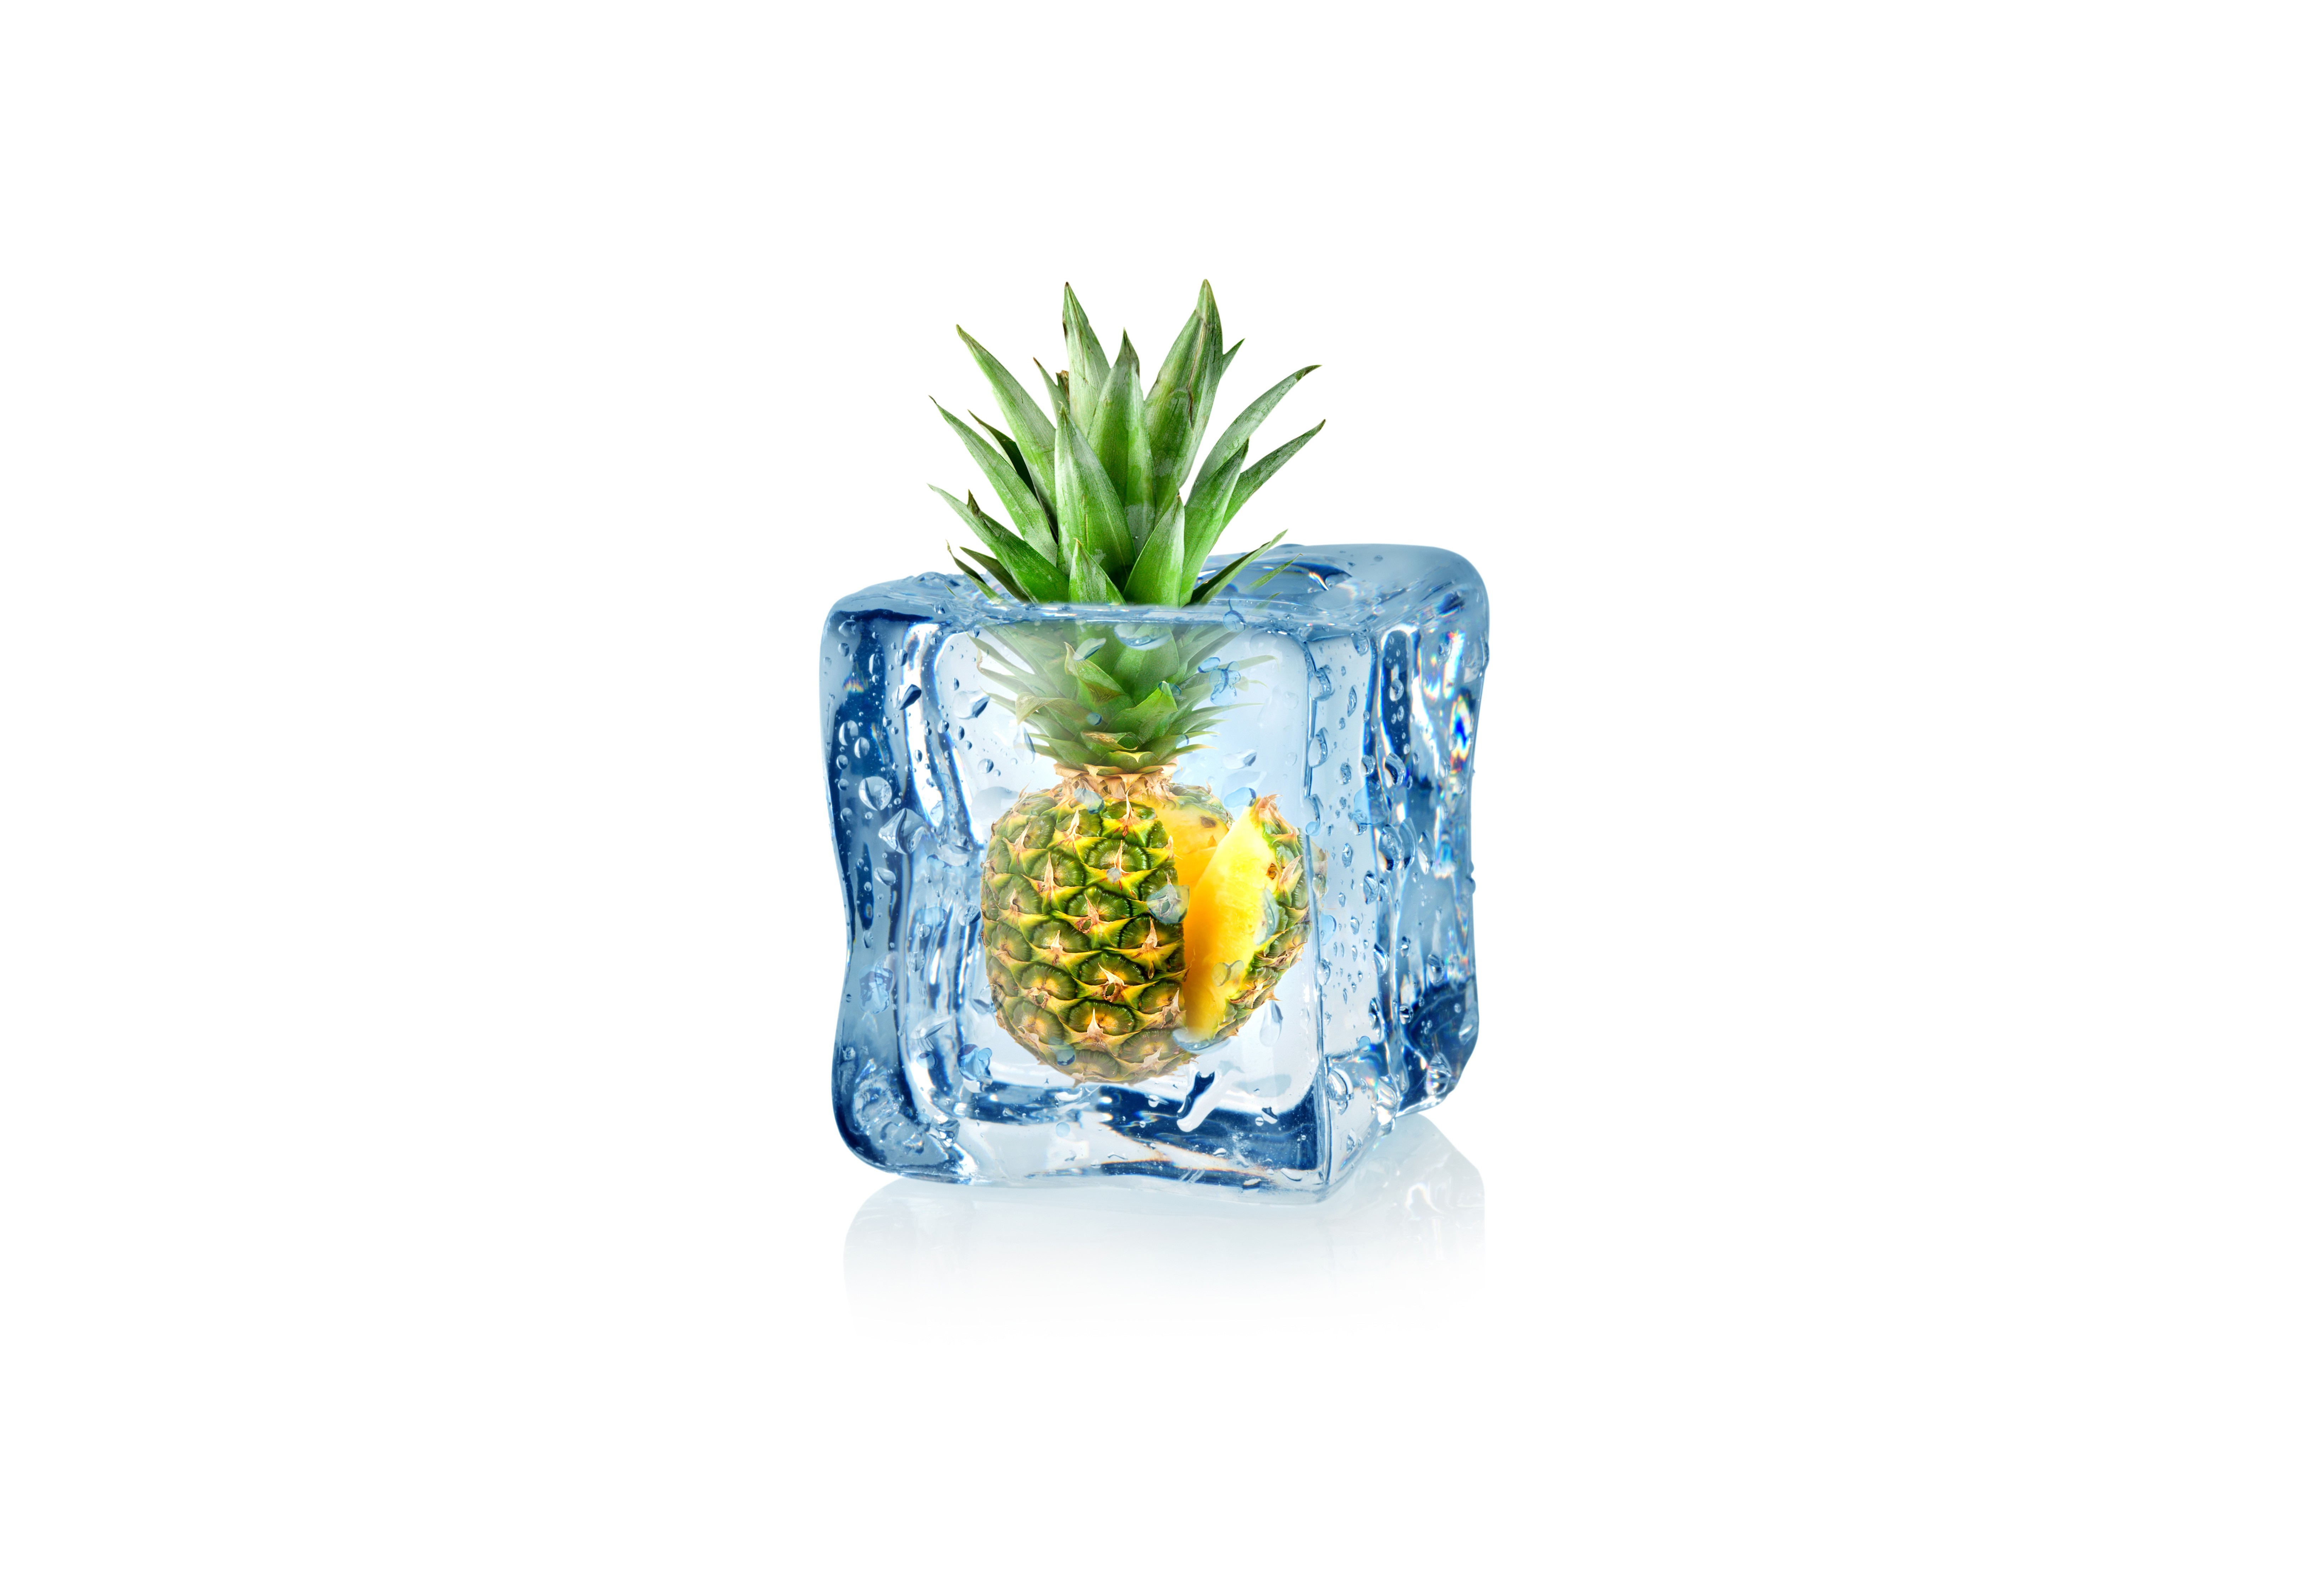 minimalism, White Background, Digital Art, Ice Cubes, Pineapples, Leaves, Water Drops Wallpaper